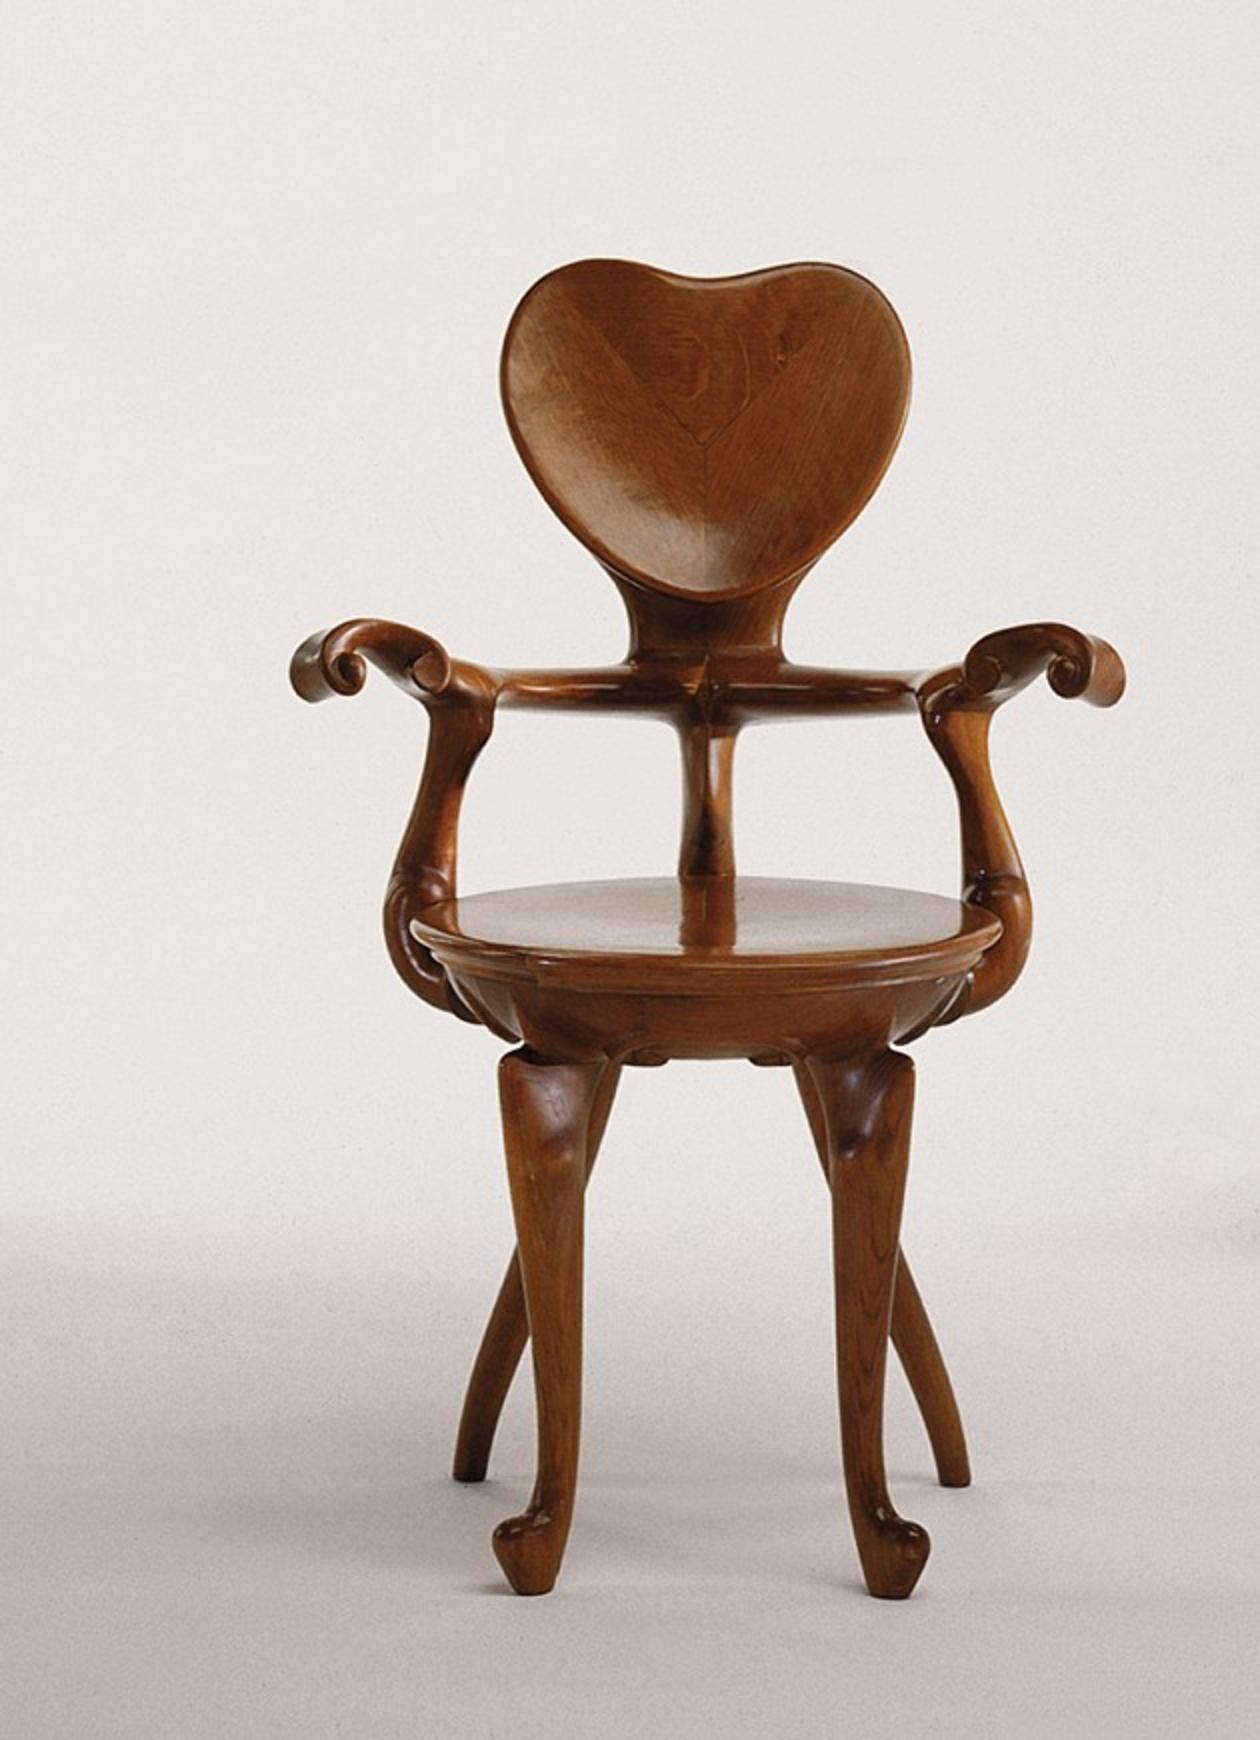 Calvet armchair, Antonio Gaudí
1902
Dimensions: 65 x 52 x 95 cm
Materials: Dark varnished oak

Solid dark varnished oak

Antoni Gaudí (1852/1926) is, without doubt, the most internationally well-known Spanish architect. But is not only his buildings